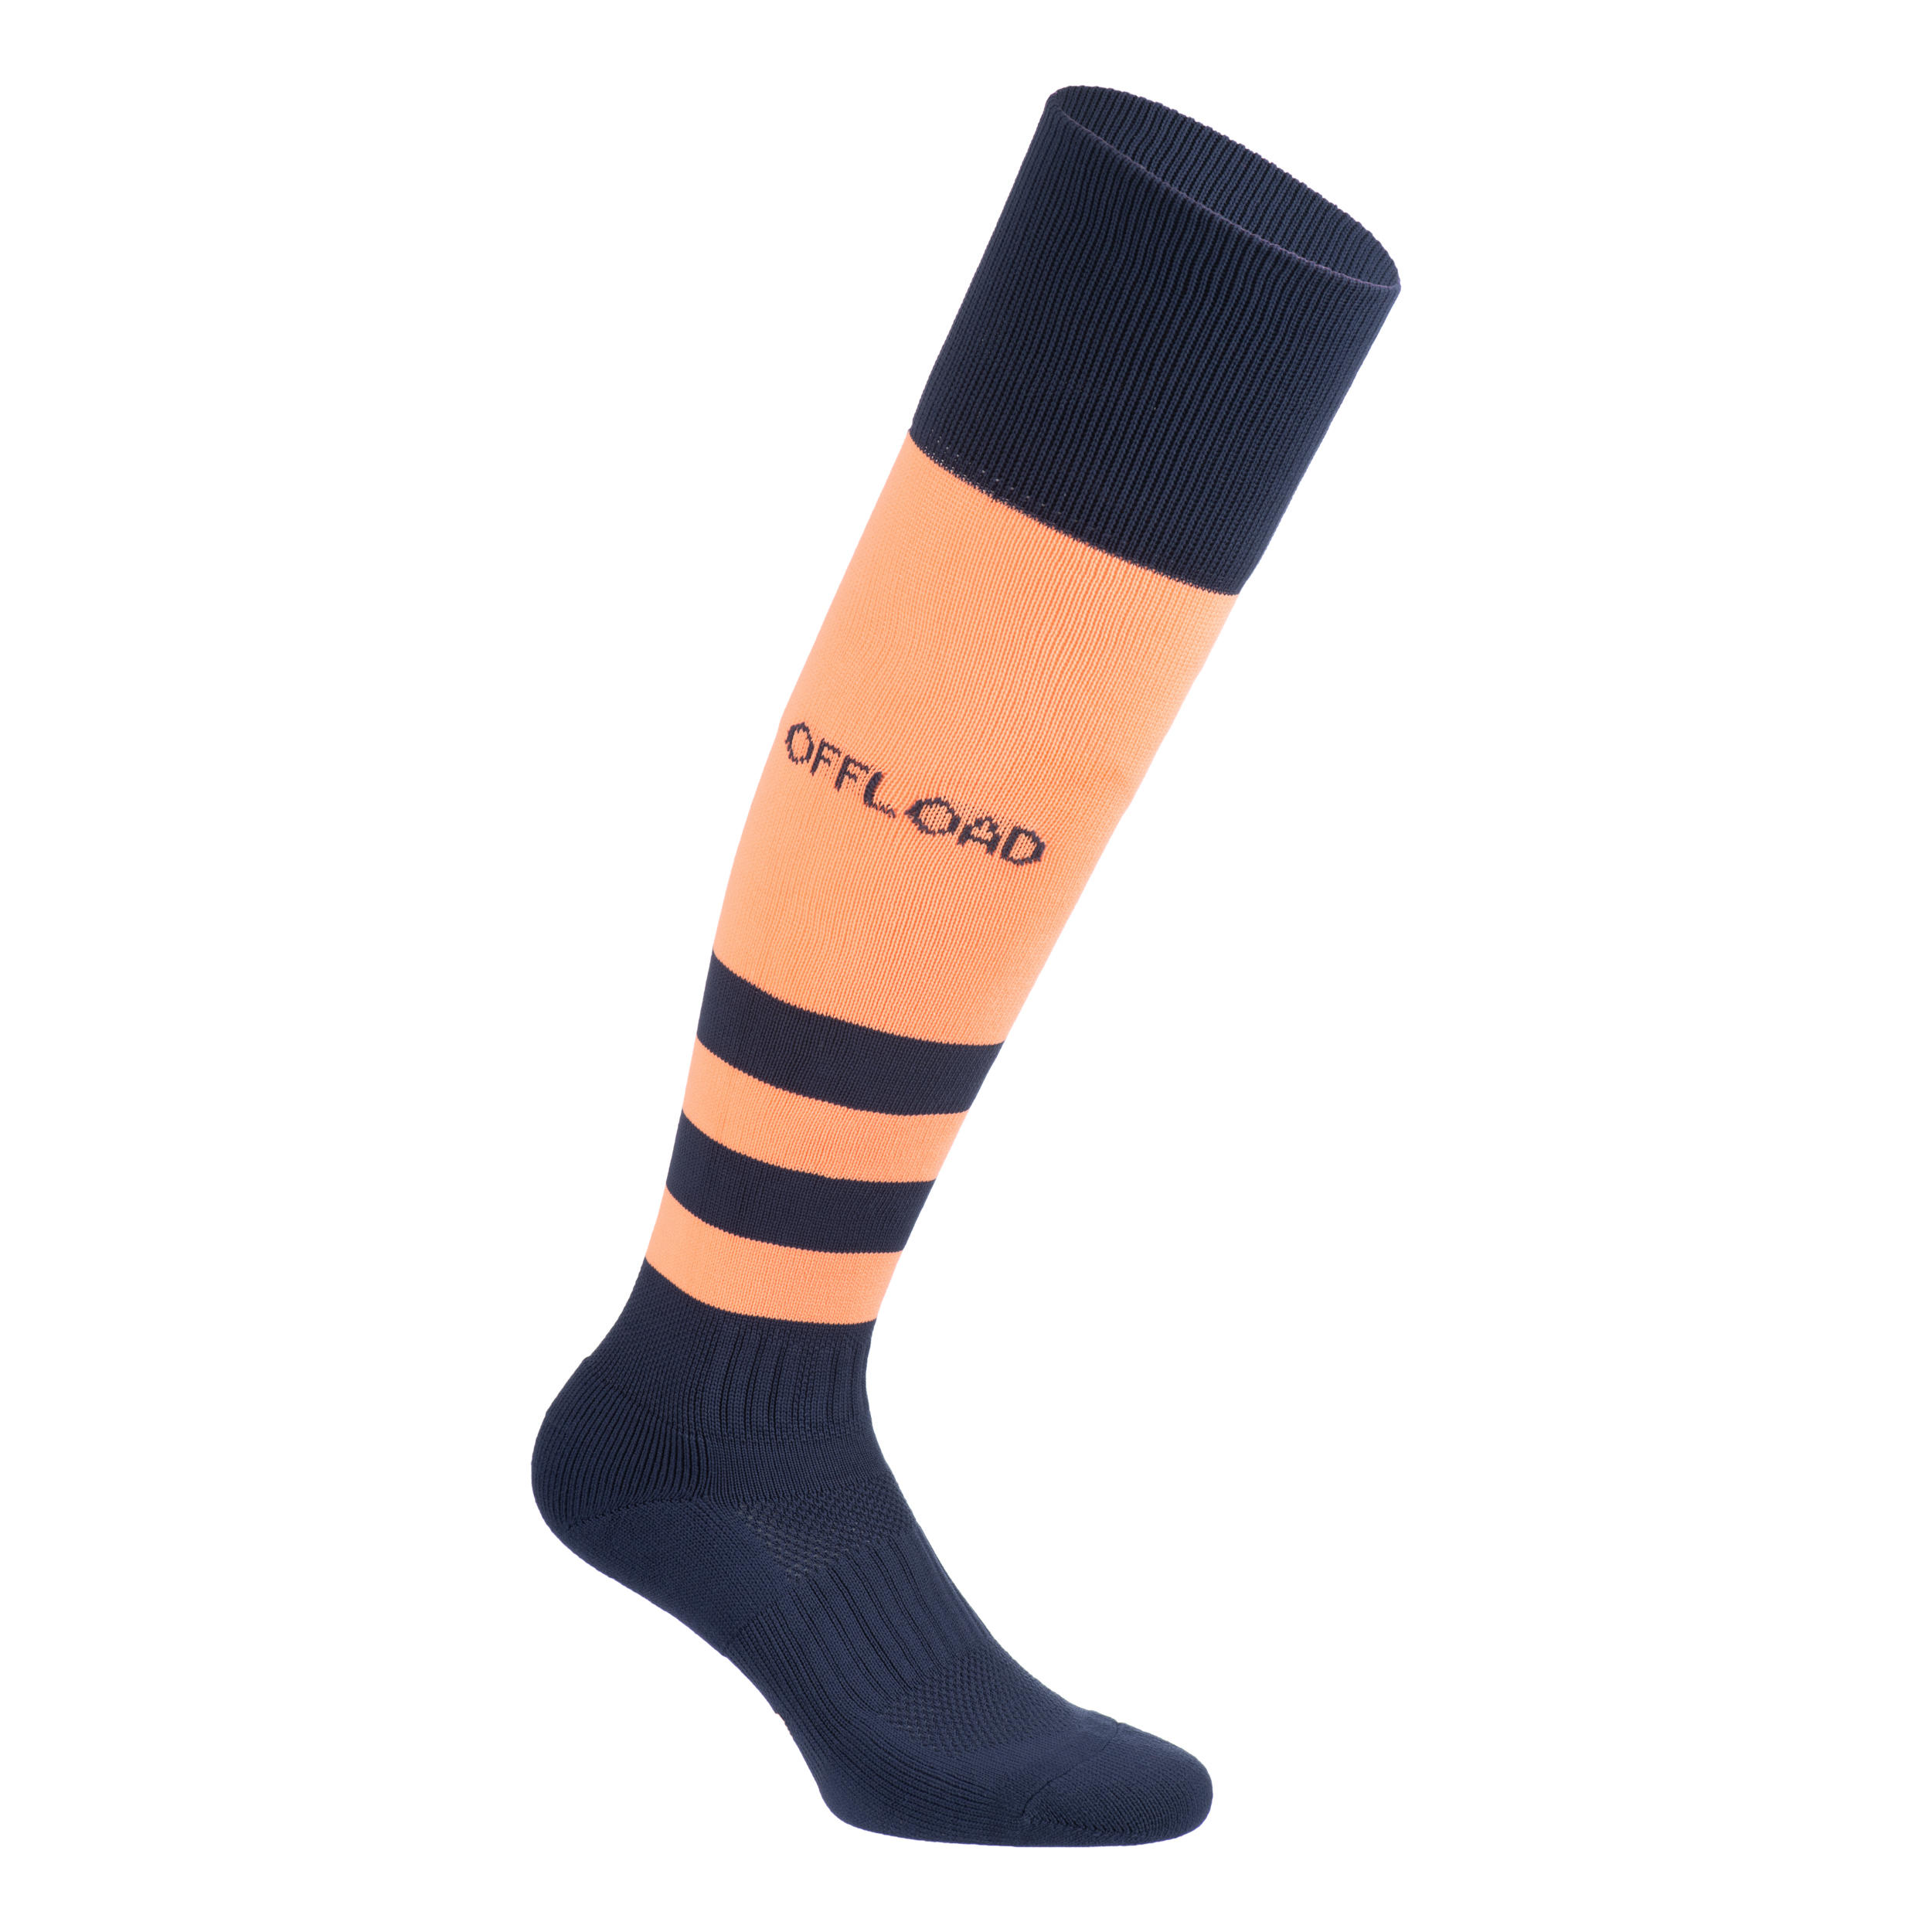 6 Pack Anti Slip Silicone Football Socks Decathlon With Cup Grip For  Soccer, Baseball, Rugby Mens, Womens Sock From Guan07, $14.68